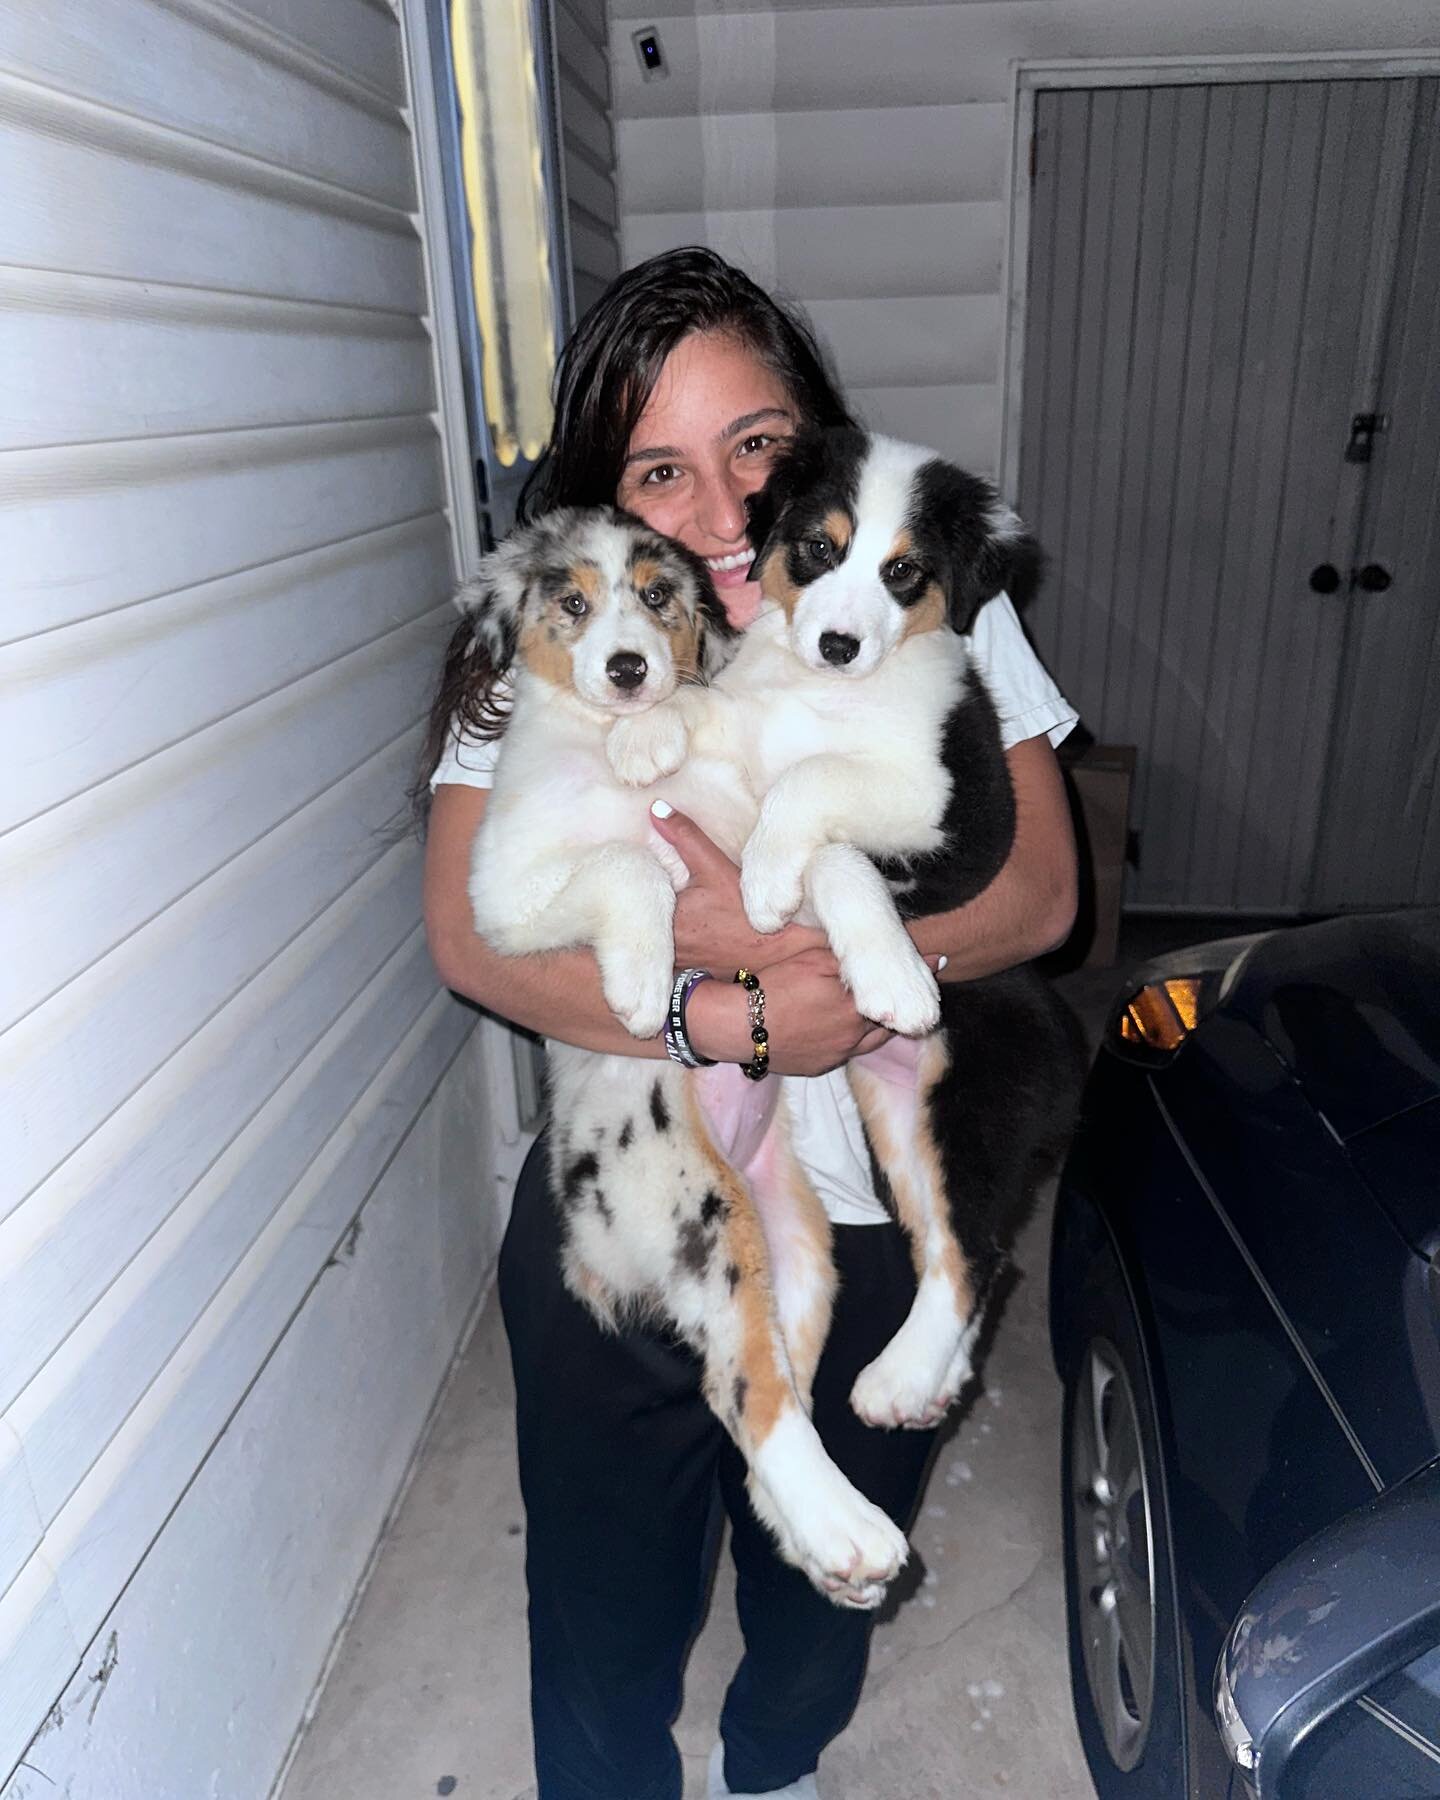 My oh my we had some good looking Aussie pups aboard! Briarbrook Aussies has some amazing, beautiful pups in Missouri! So glad they let us take these pups to their home in PA. 
Had to include a picture of my Marlee as well cuz she&rsquo;s a pretty go